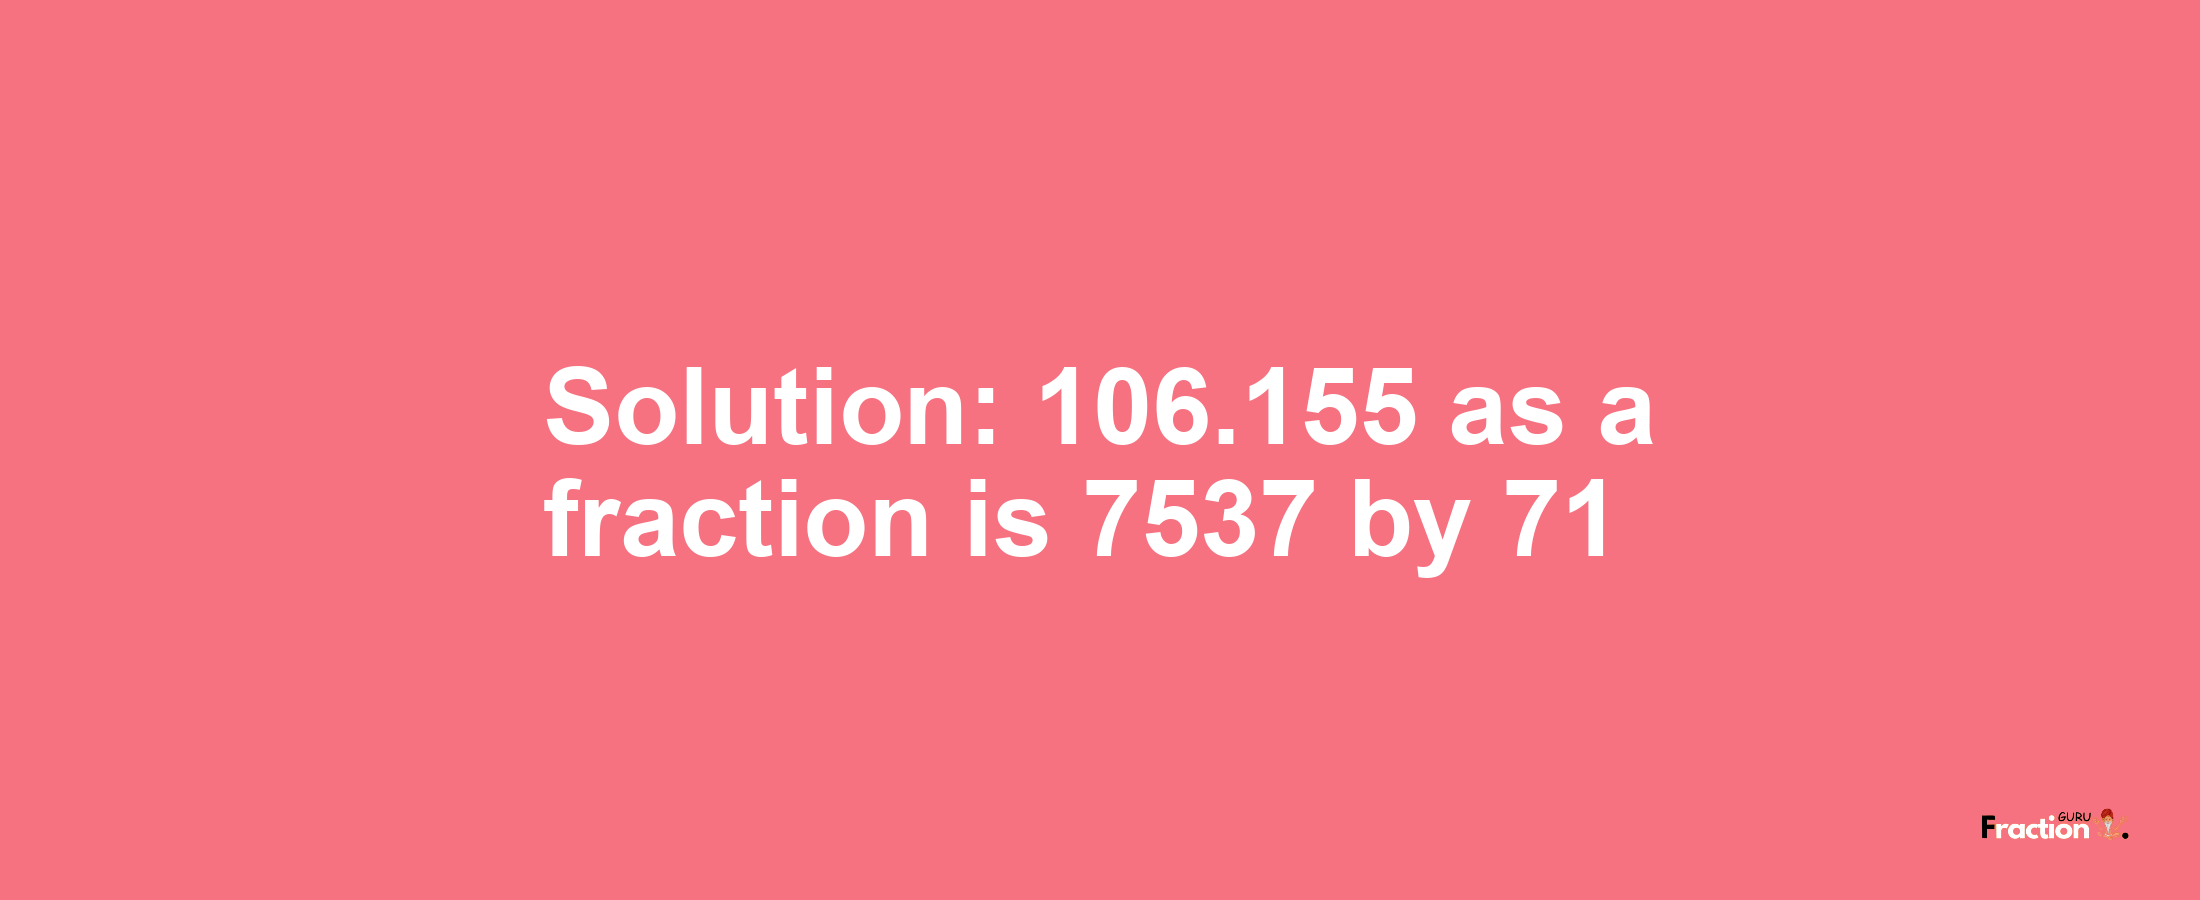 Solution:106.155 as a fraction is 7537/71